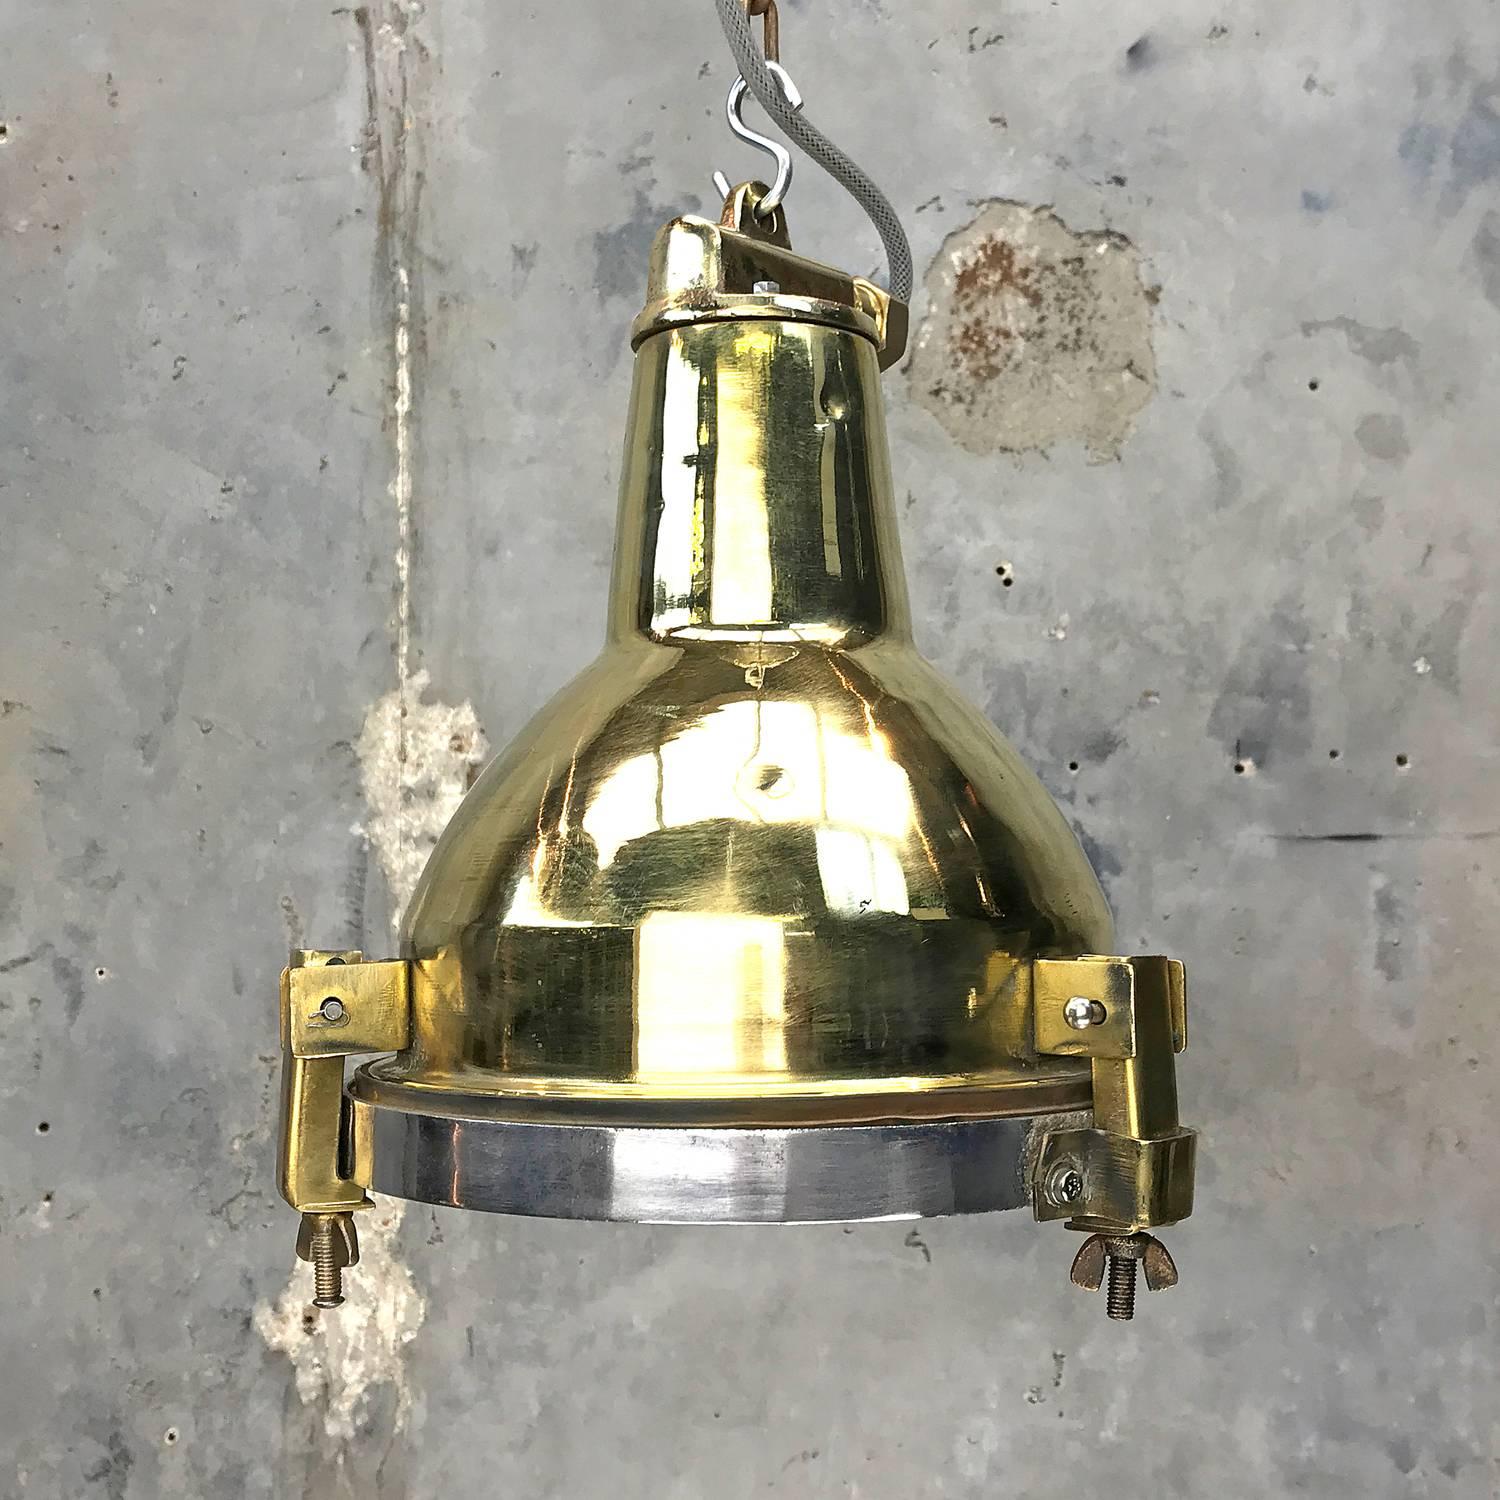 A great compact lighting solution made from brass and aluminium.

Originally these would have highlighted smaller areas on cargo ships where more architectural illumination is required.

The bulk of the light is made from spun brass with the top